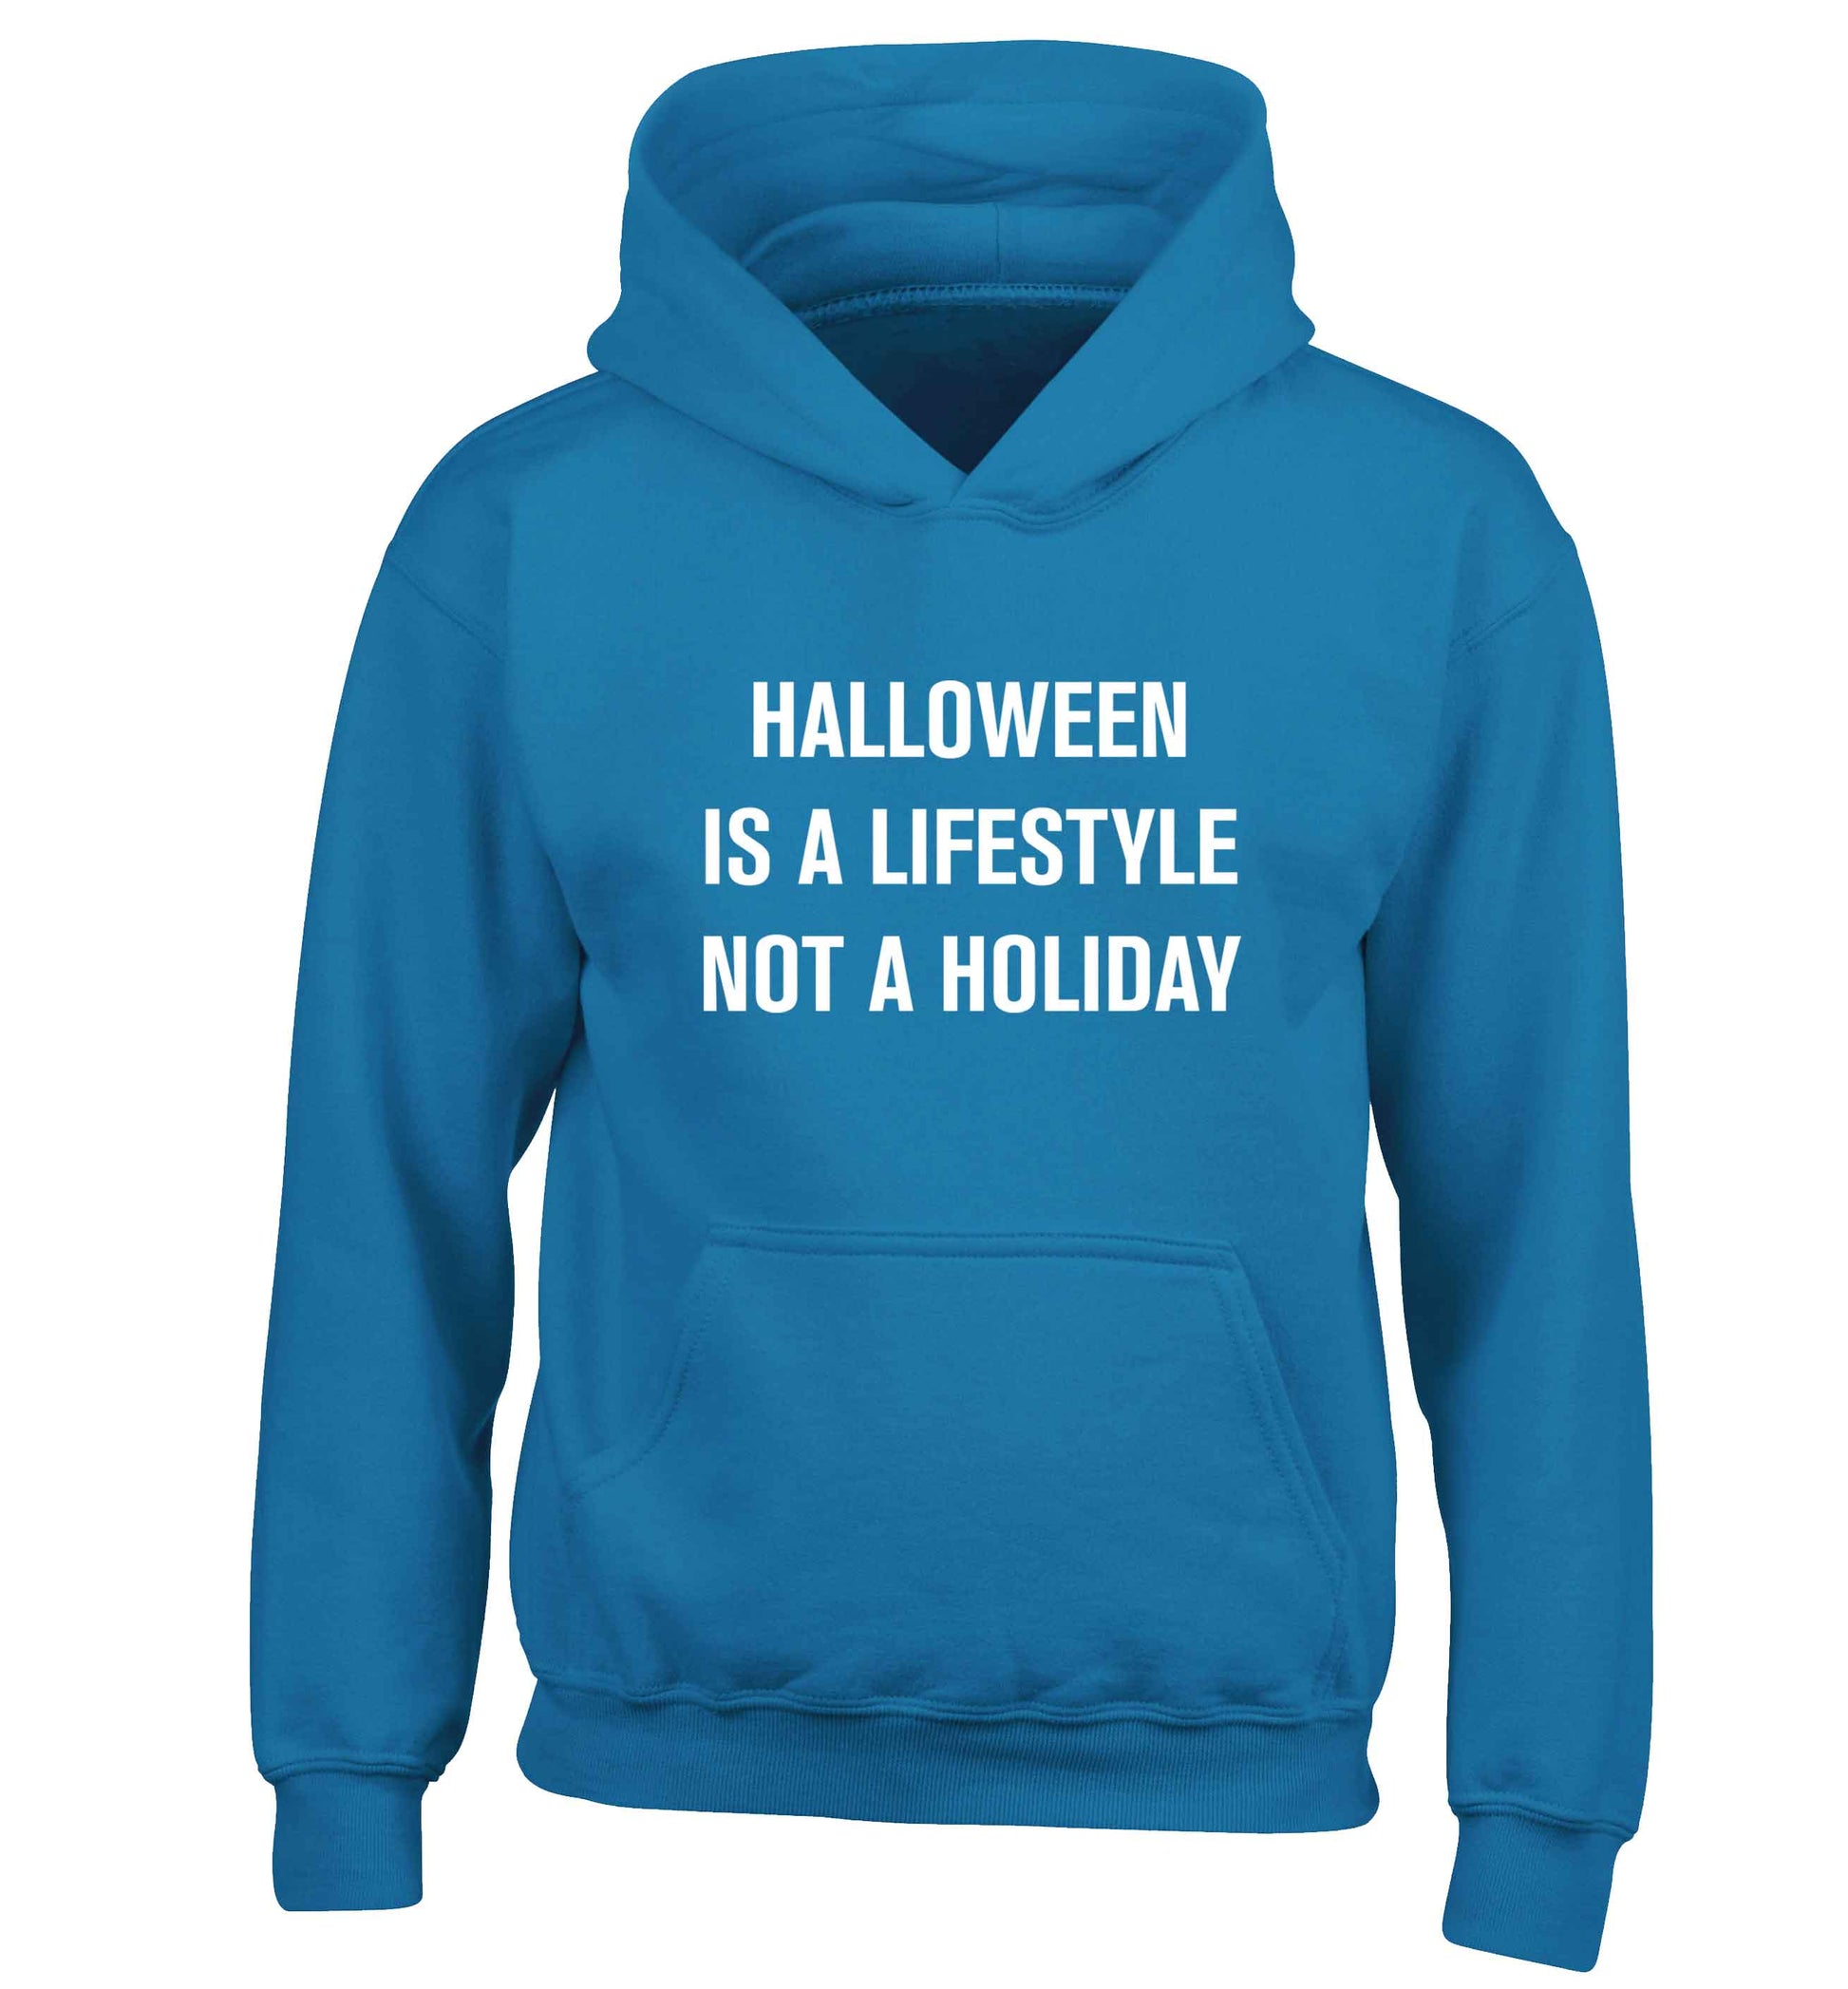 Halloween is a lifestyle not a holiday children's blue hoodie 12-13 Years